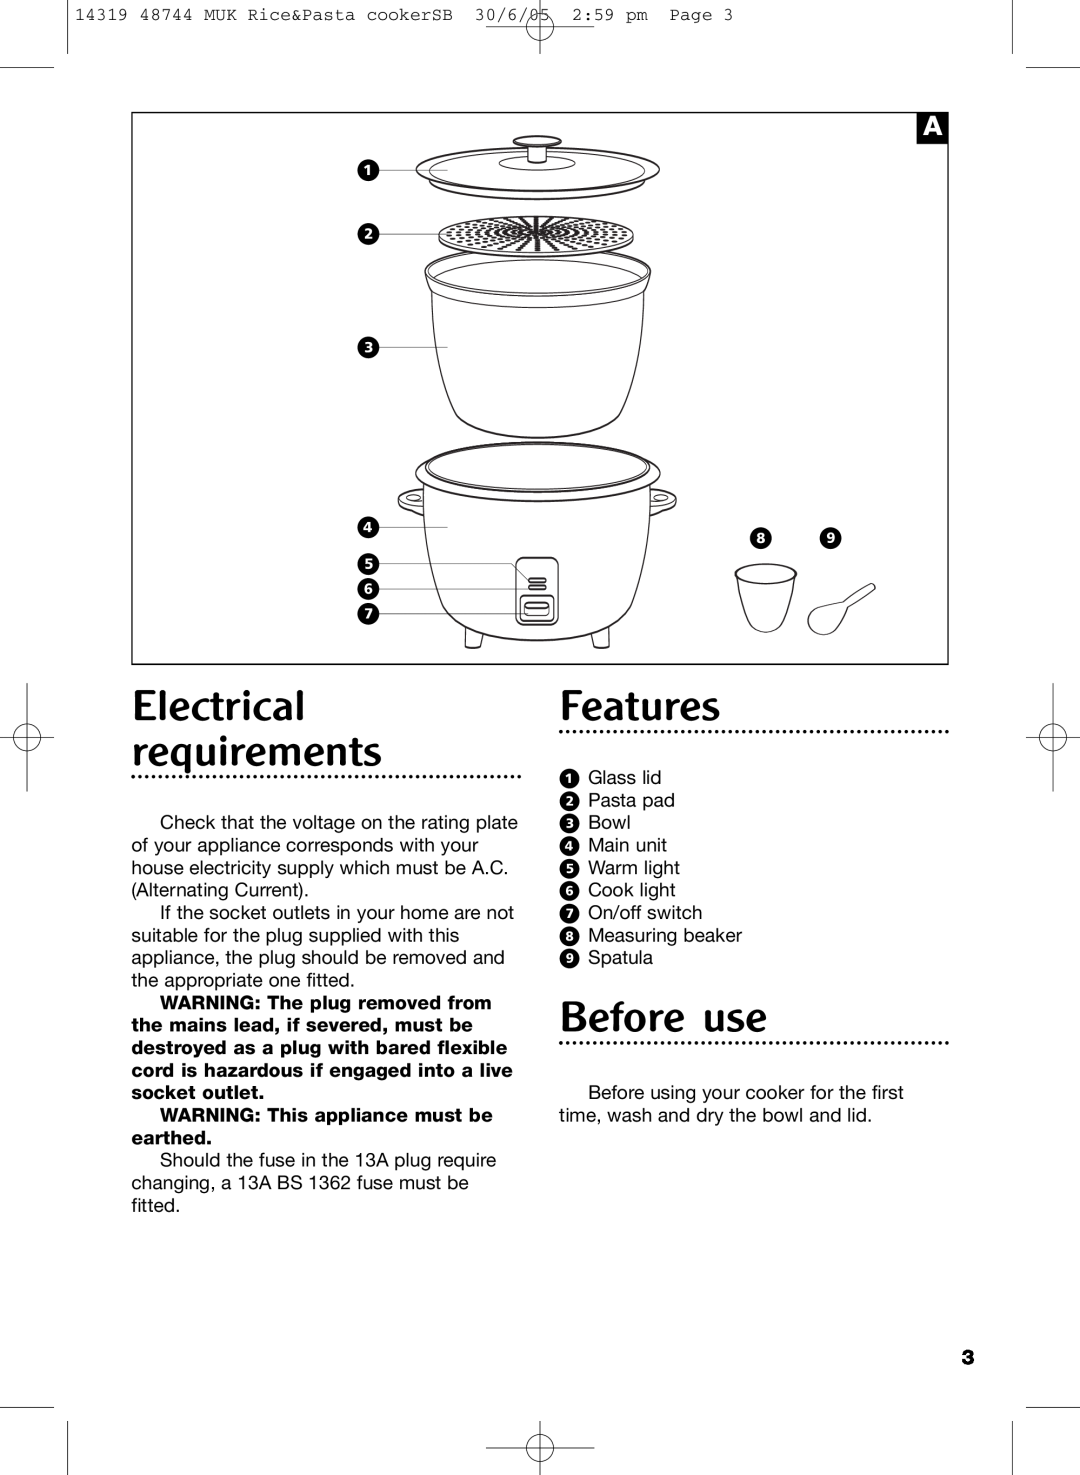 Morphy Richards cooker Electrical, Features, requirements, Before use, WARNING The plug removed from, socket outlet, ⁄ ¤ ‹ 